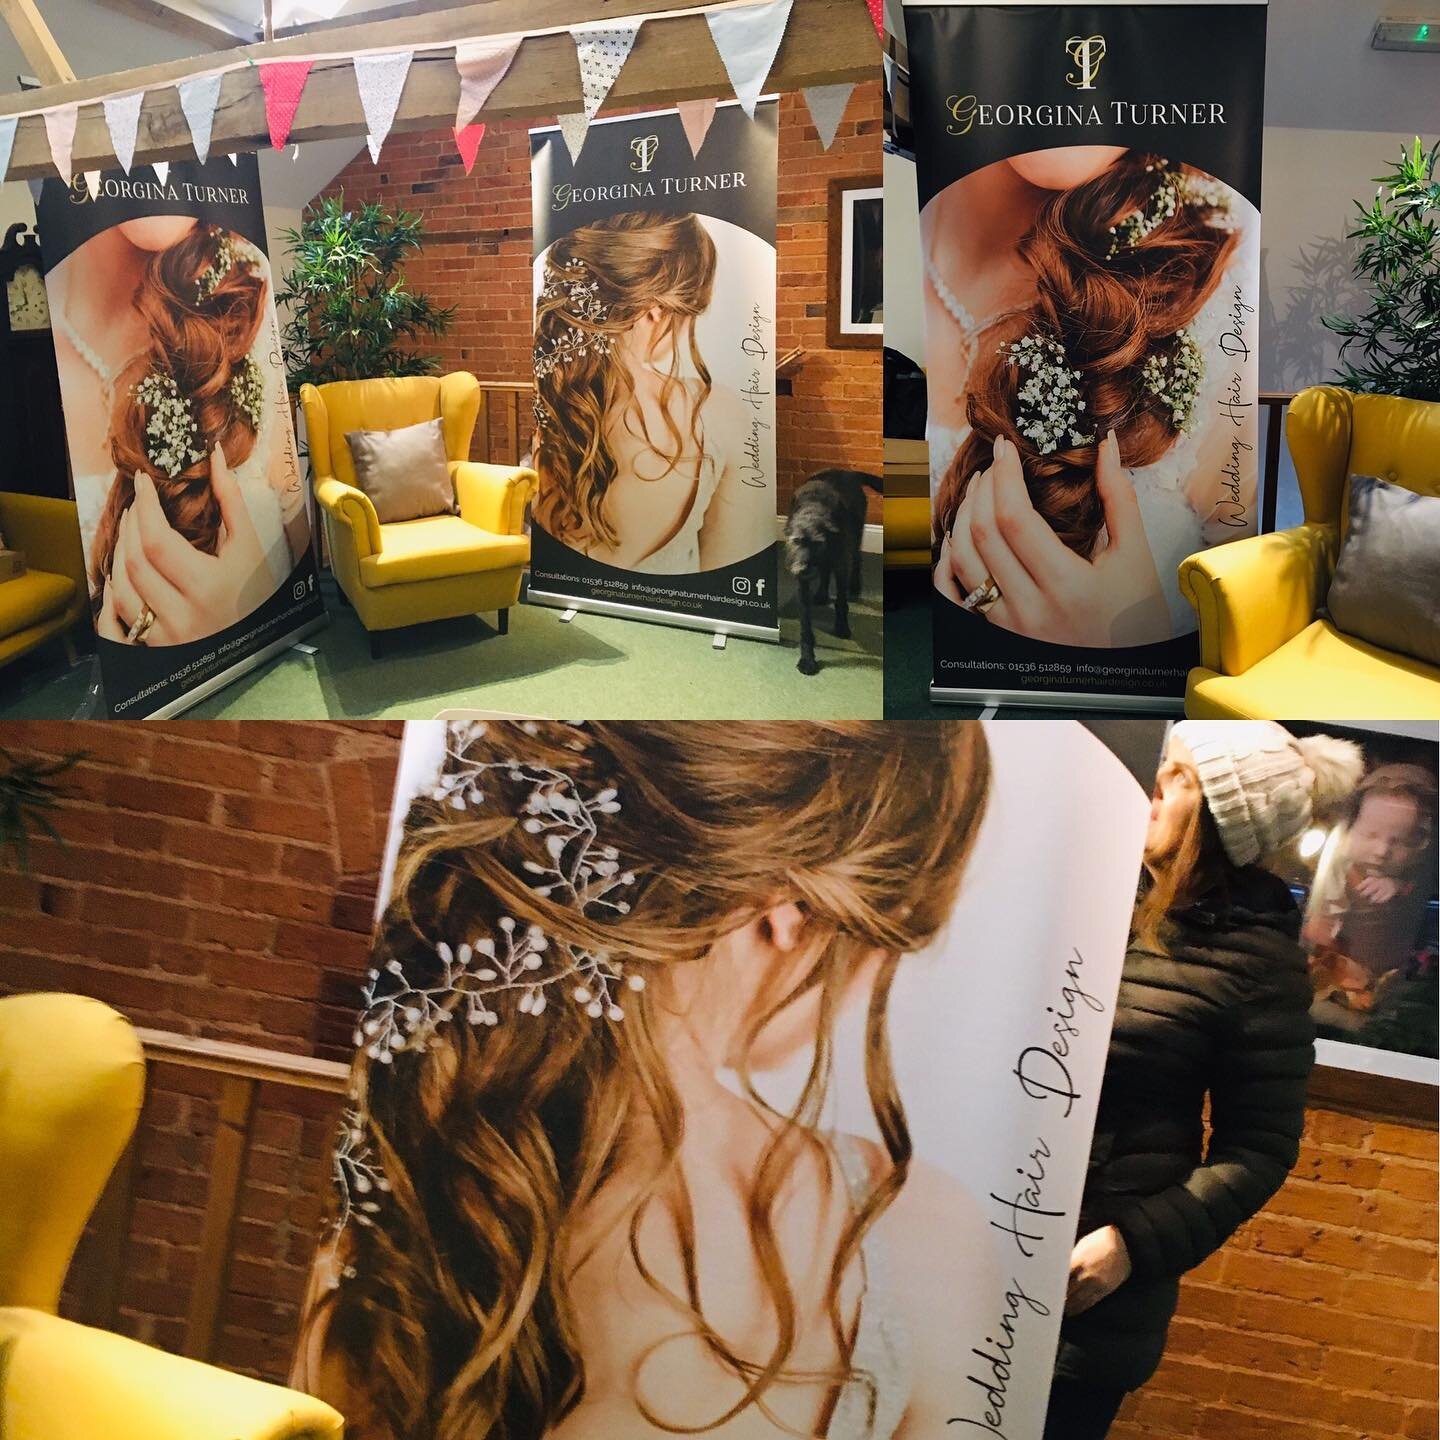 @georginaturnerhairdesign your banners are looking fab &amp; ready for dispatch 🚚❤️#weddingexpo2020 #weddinghairstylist